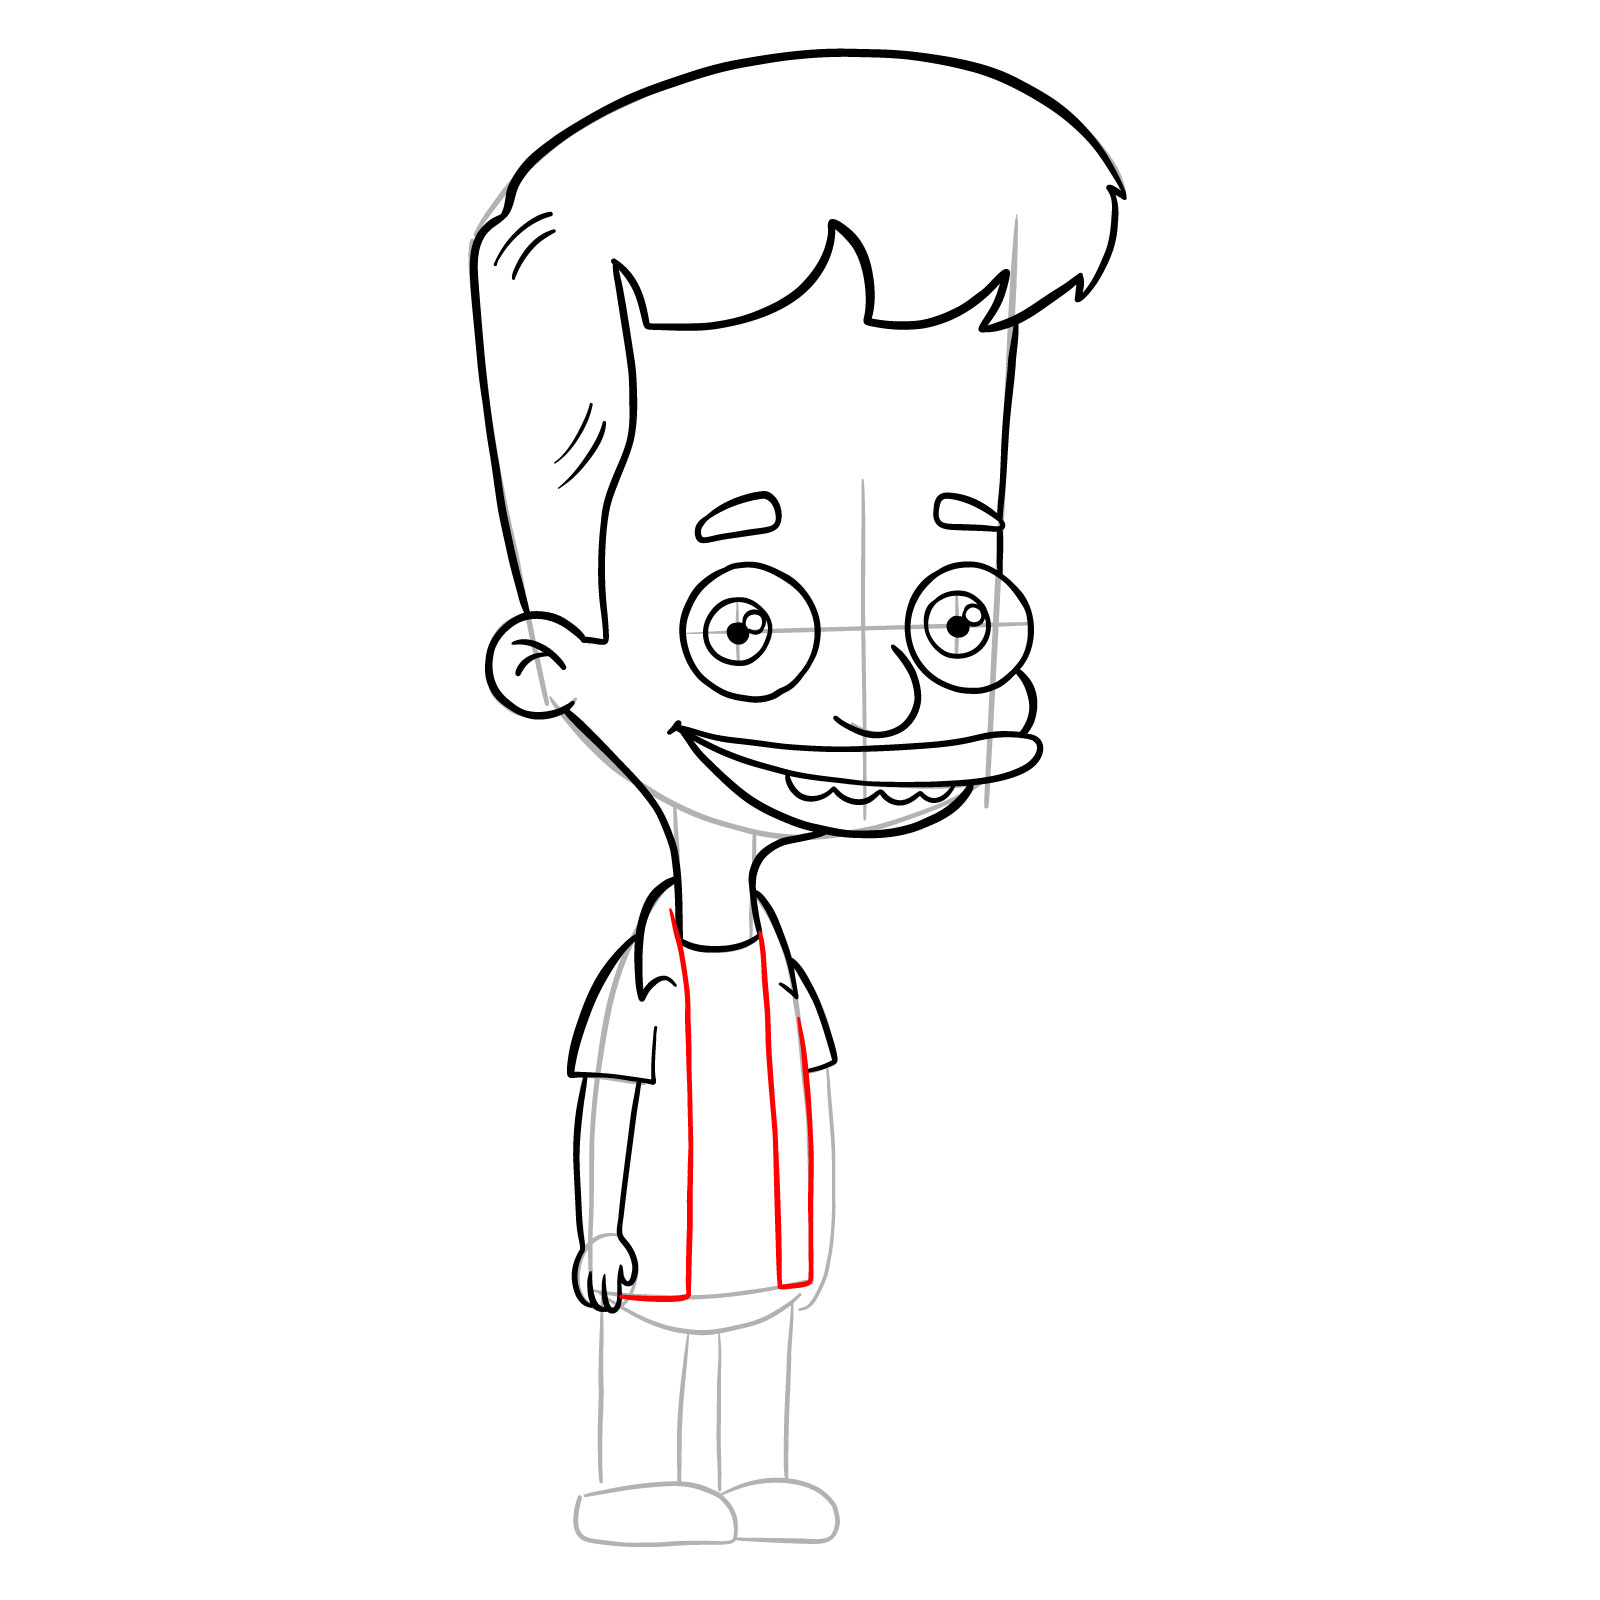 How to draw Nick Birch from Big Mouth - step 18